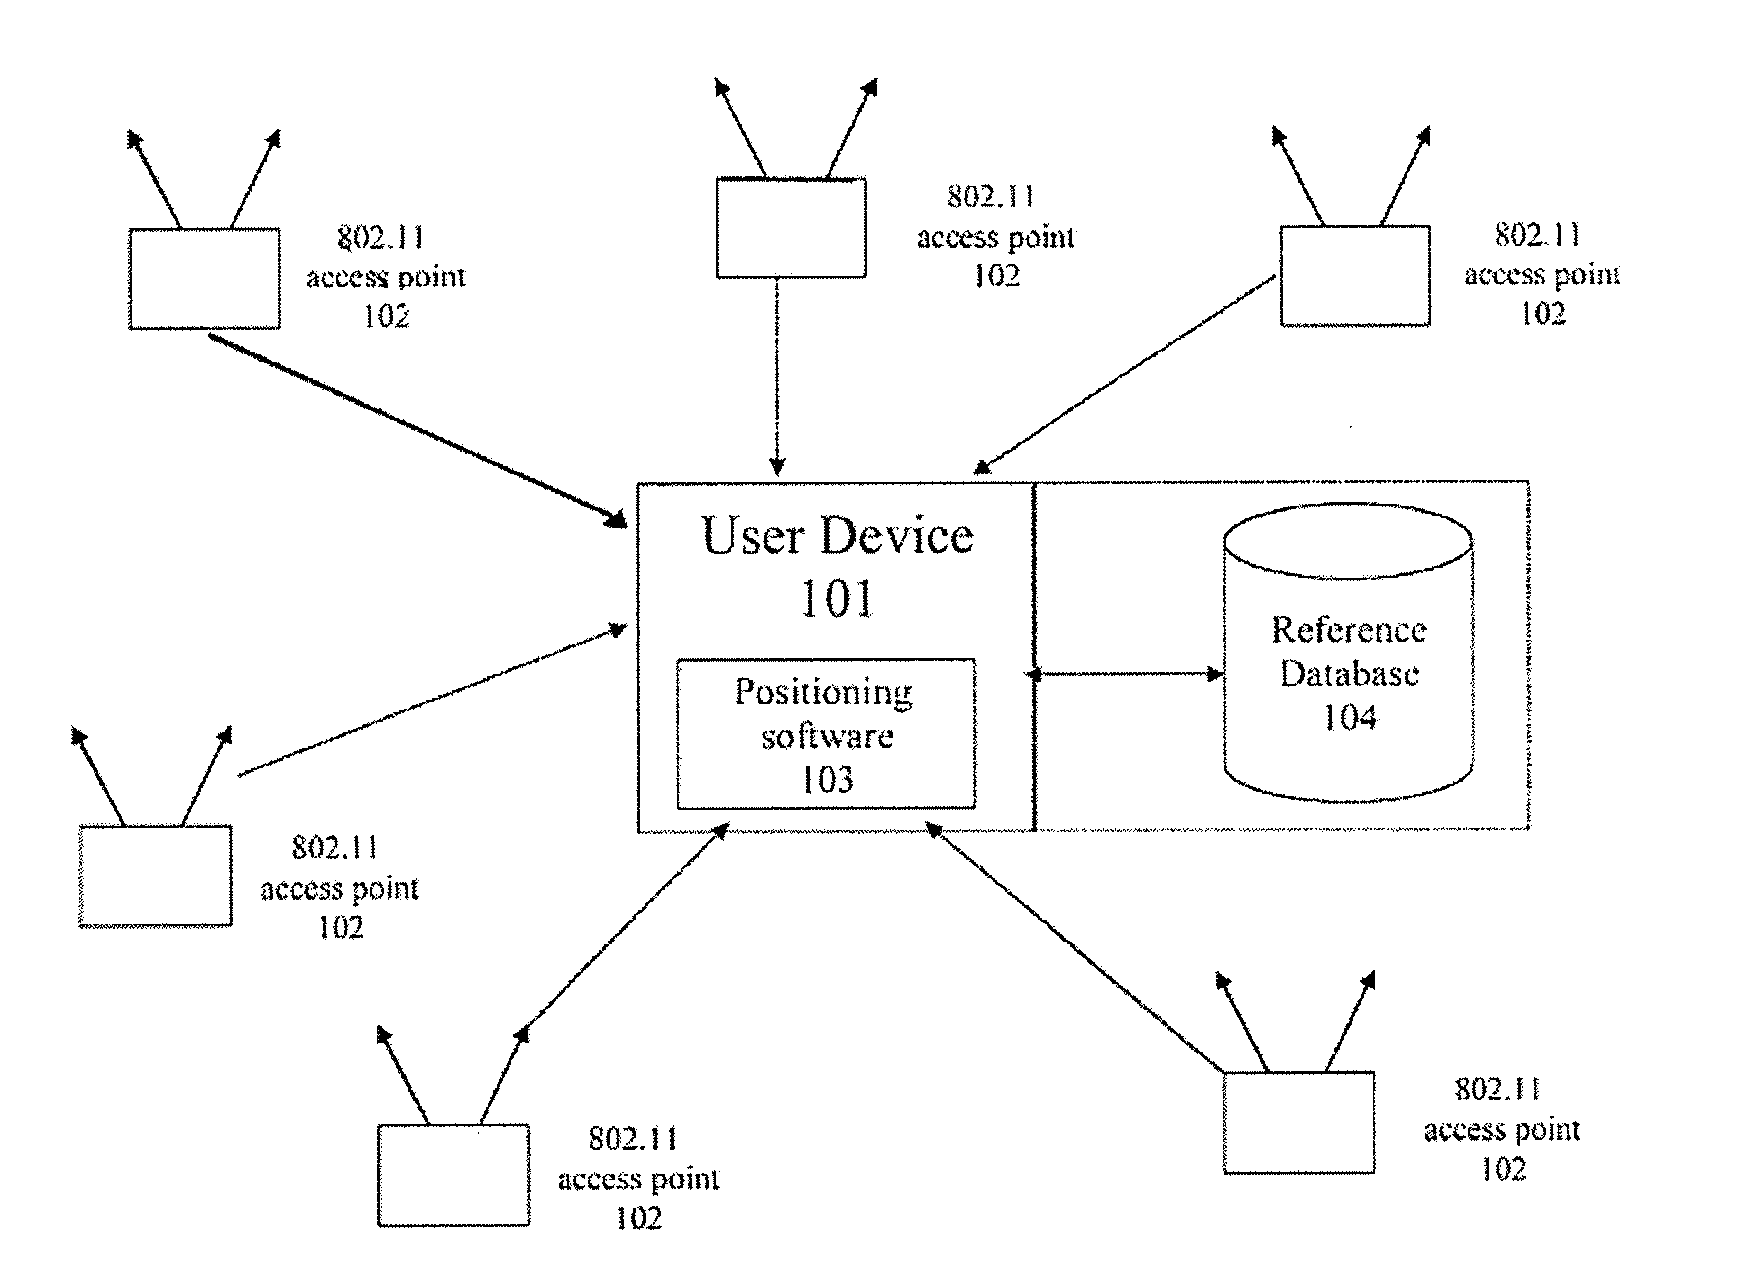 Methods and systems for improving the accuracy of expected error estimation in location determinations using a hybrid cellular and WLAN positioning system